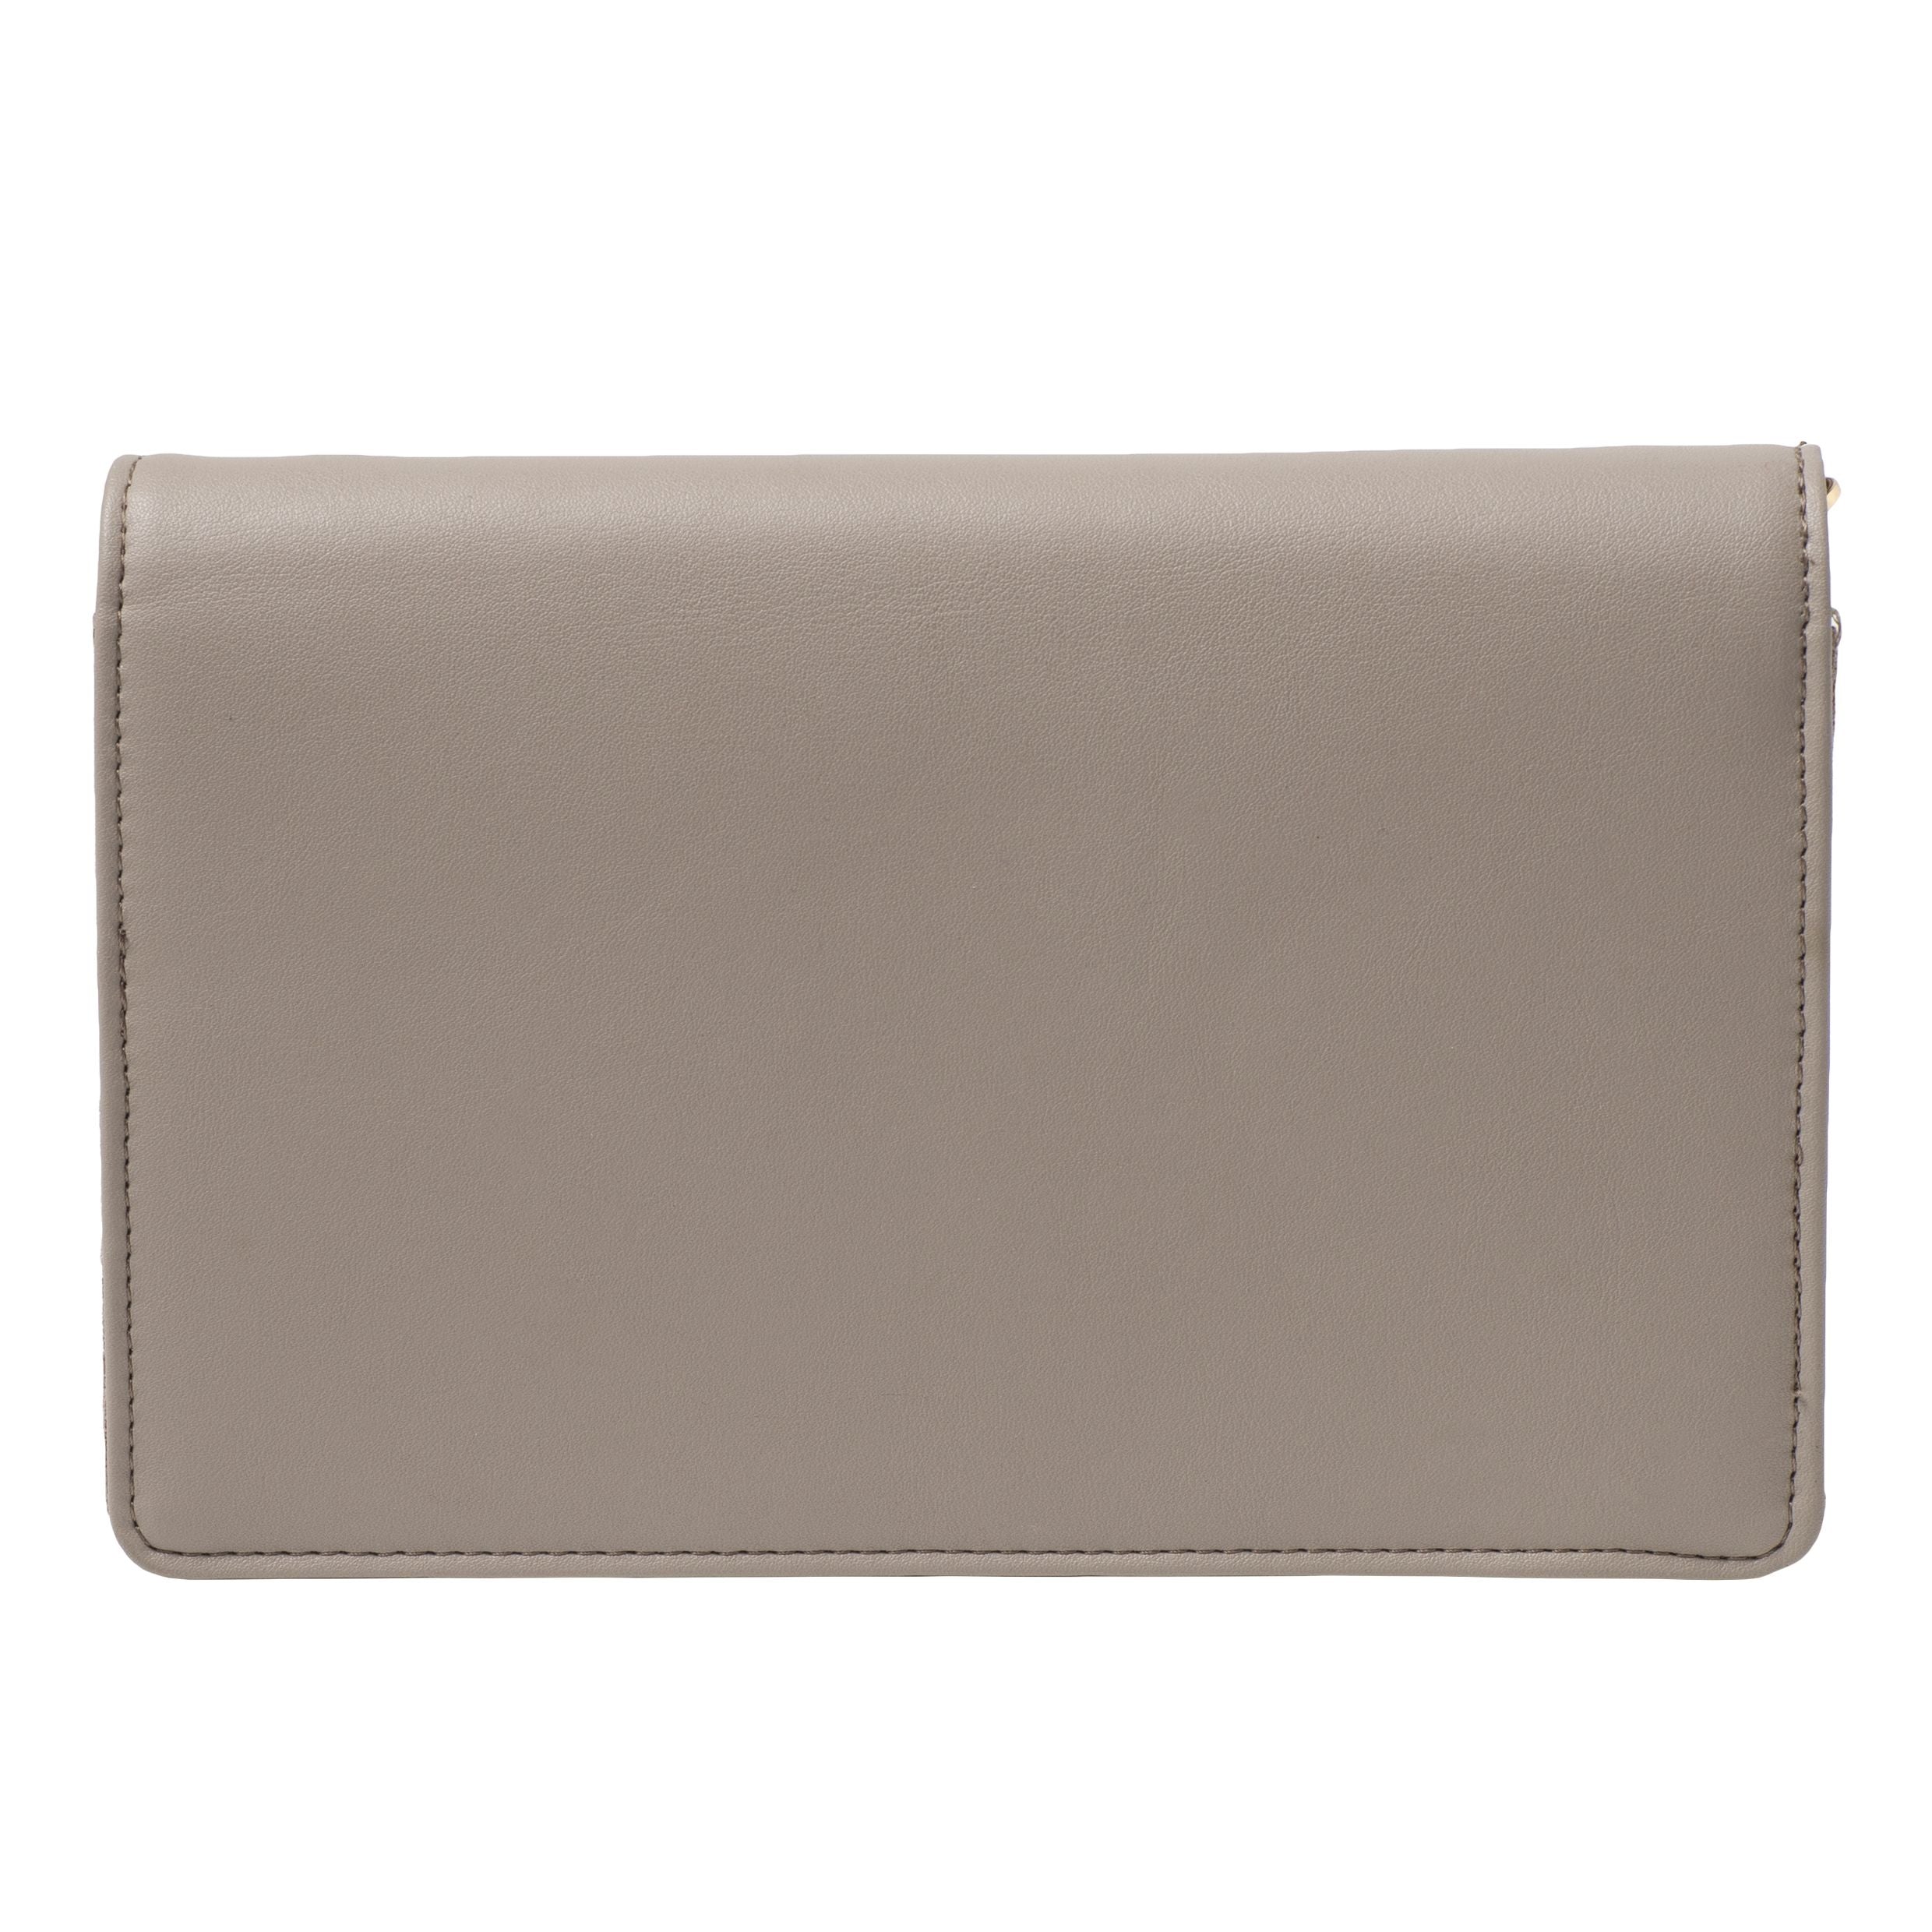 Excite Promotional Merchandise. CACHAREL LADY BAG ODEON TAUPE